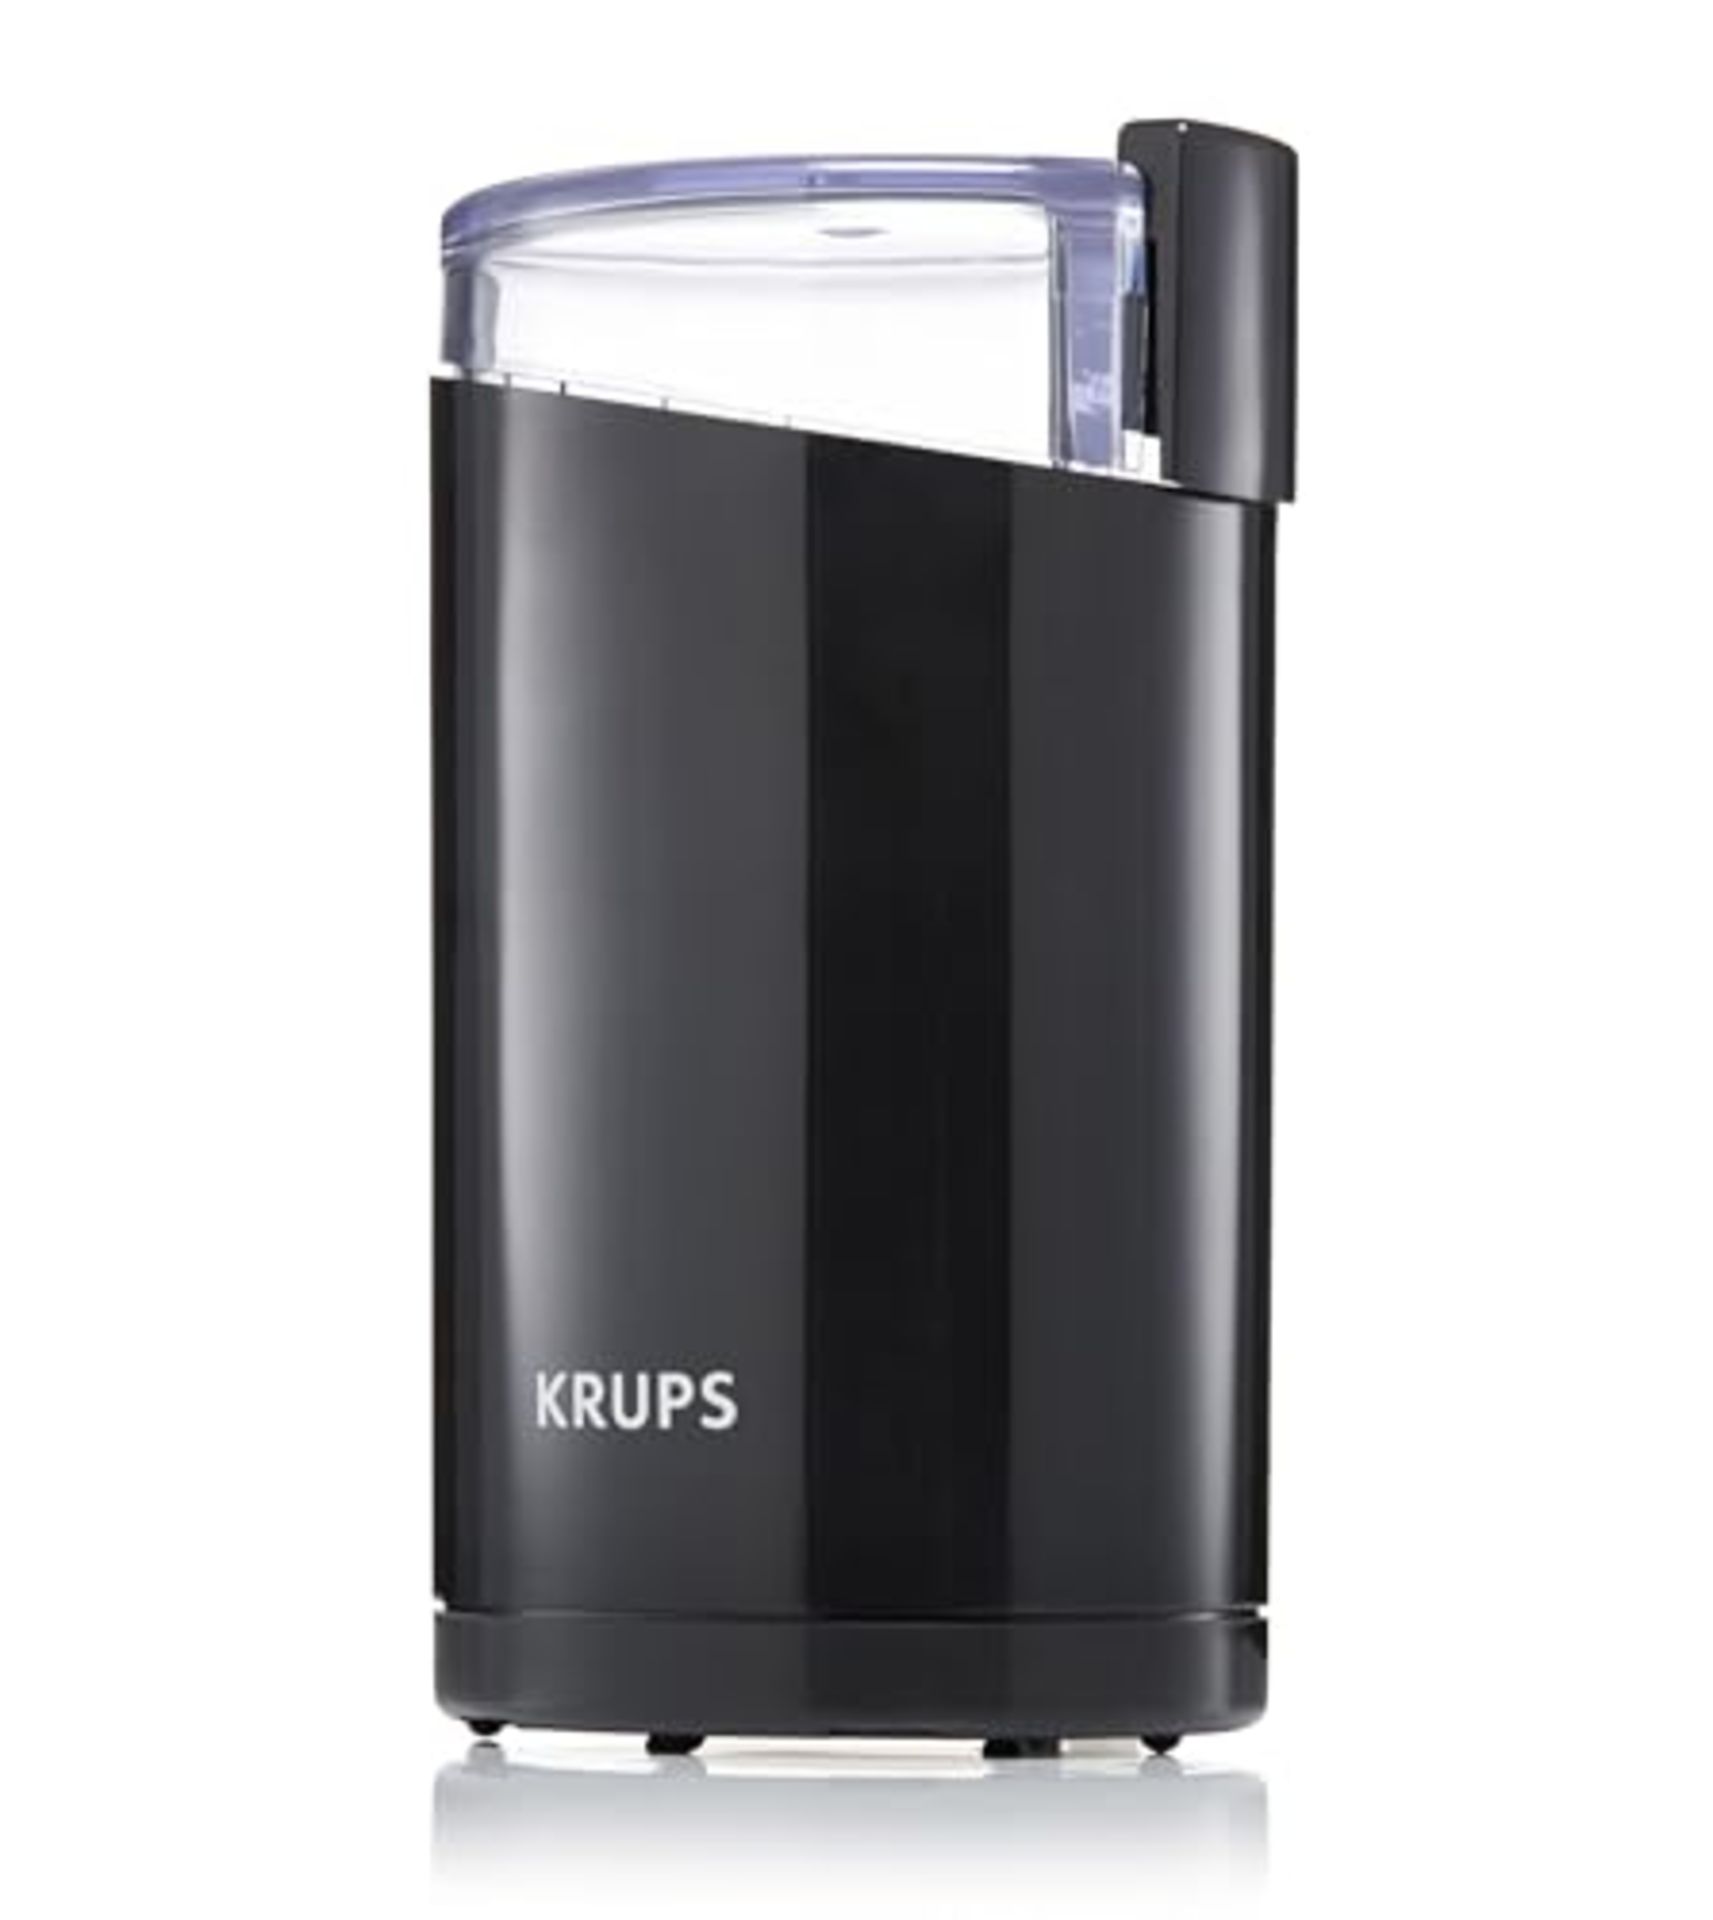 KRUPS Coffee Mill and Spice Grinder 12 Cup Easy to Use, One Touch Operation 200 Watts